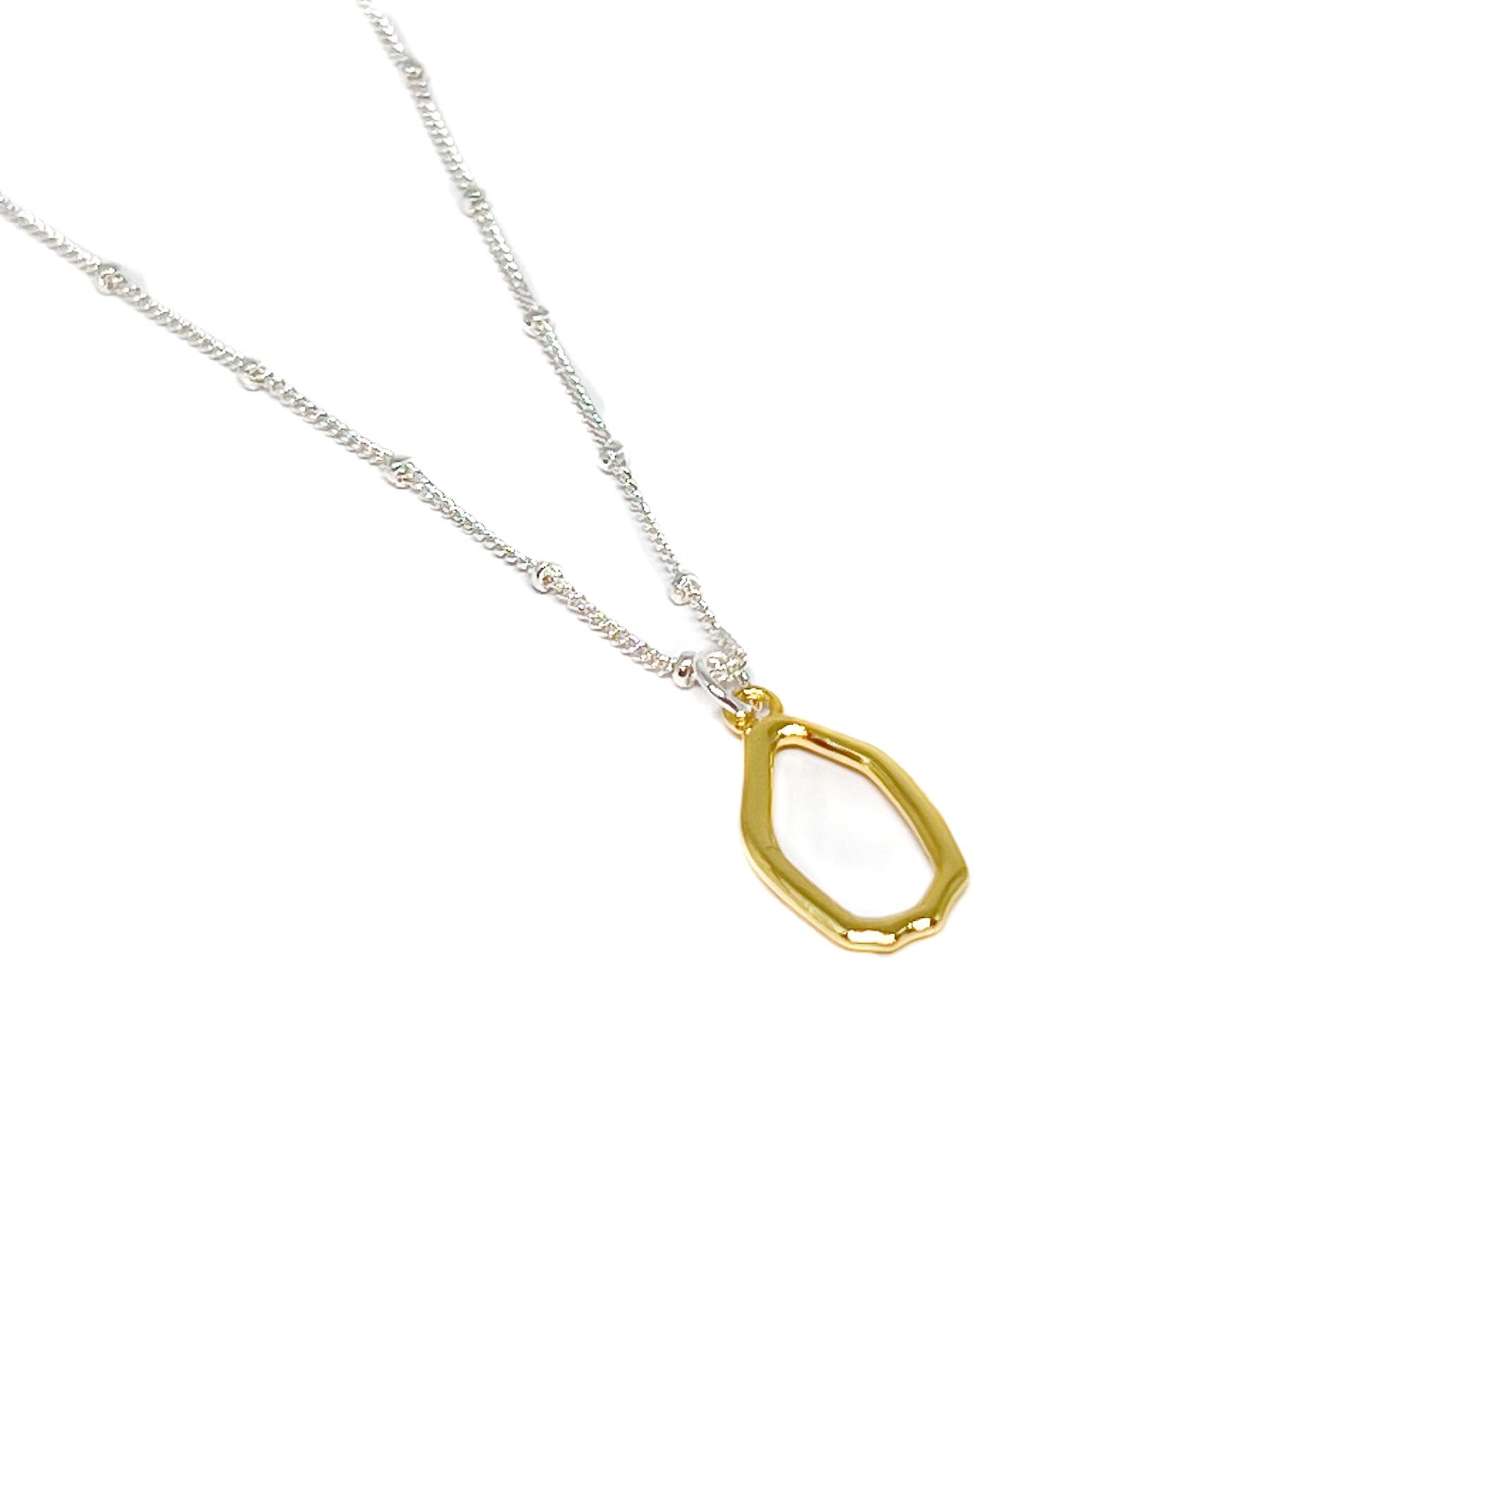 Olea Oval Necklace - Gold